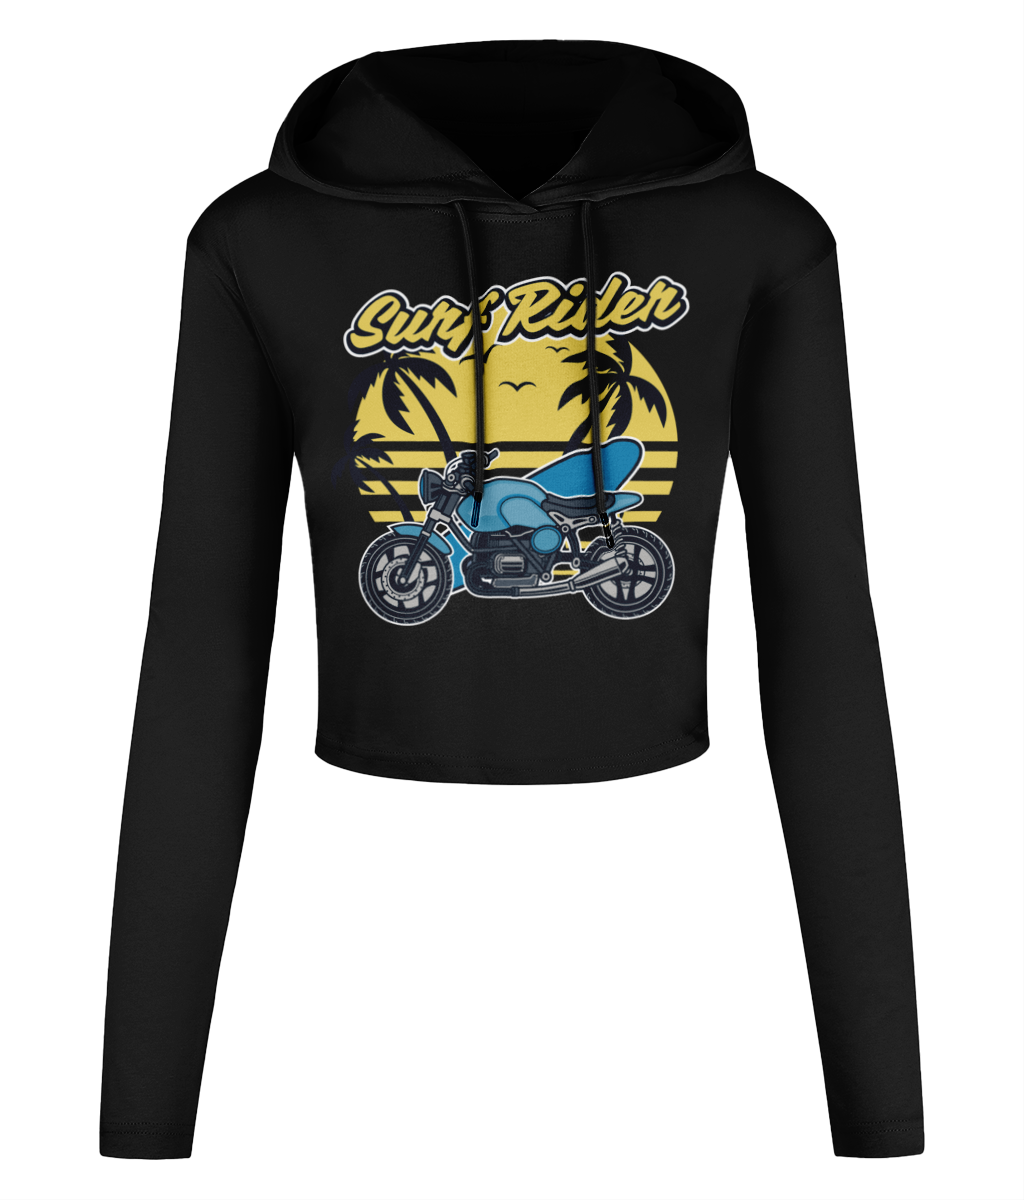 Surf Rider – Women’s Cropped Hooded T-shirt